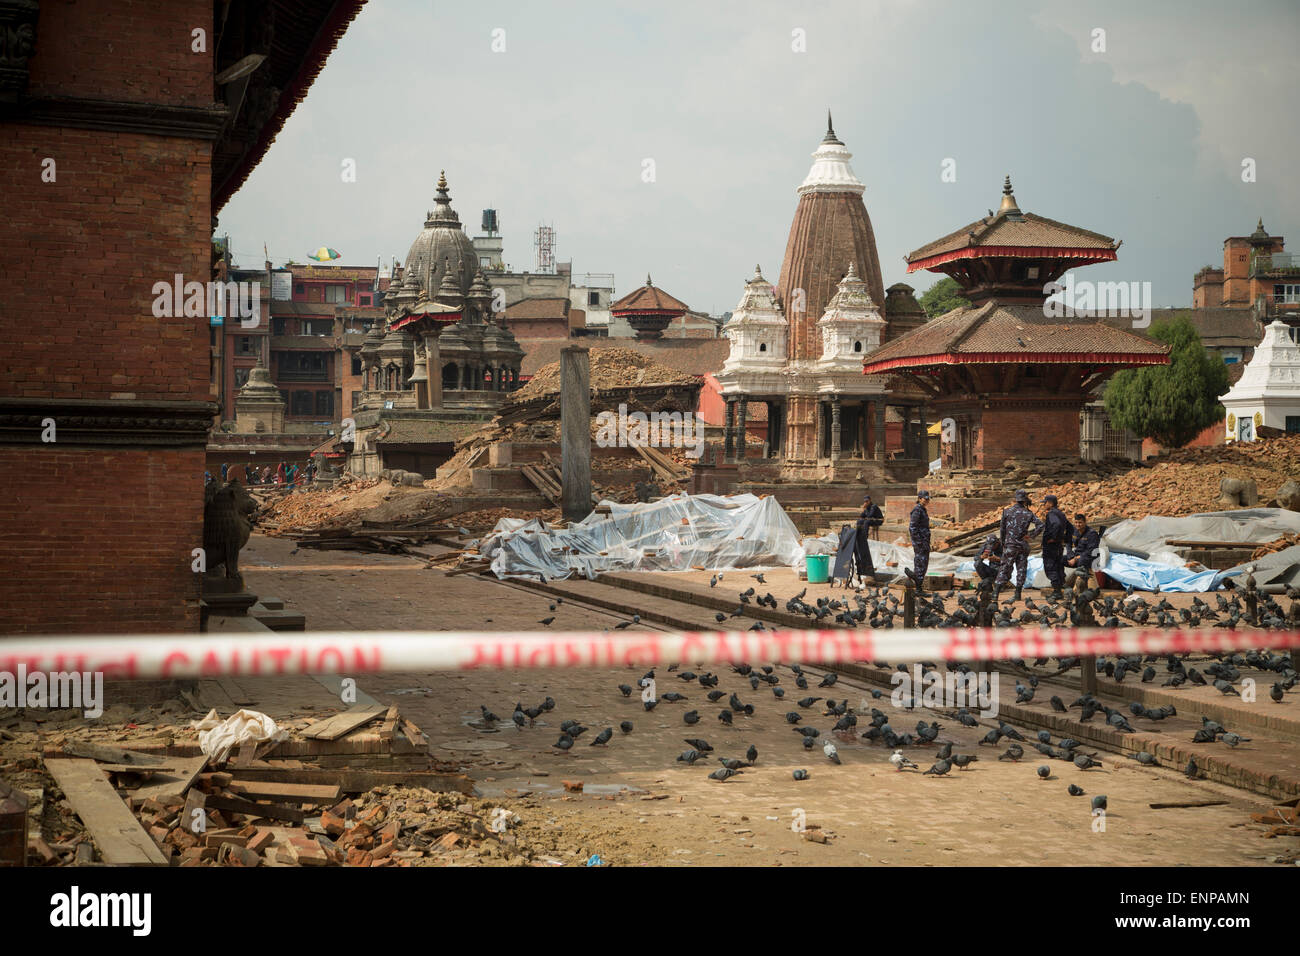 Patan's (Lalitpur's) Durbar Square is badly damaged following the 2015 earthquake in Nepal. Stock Photo